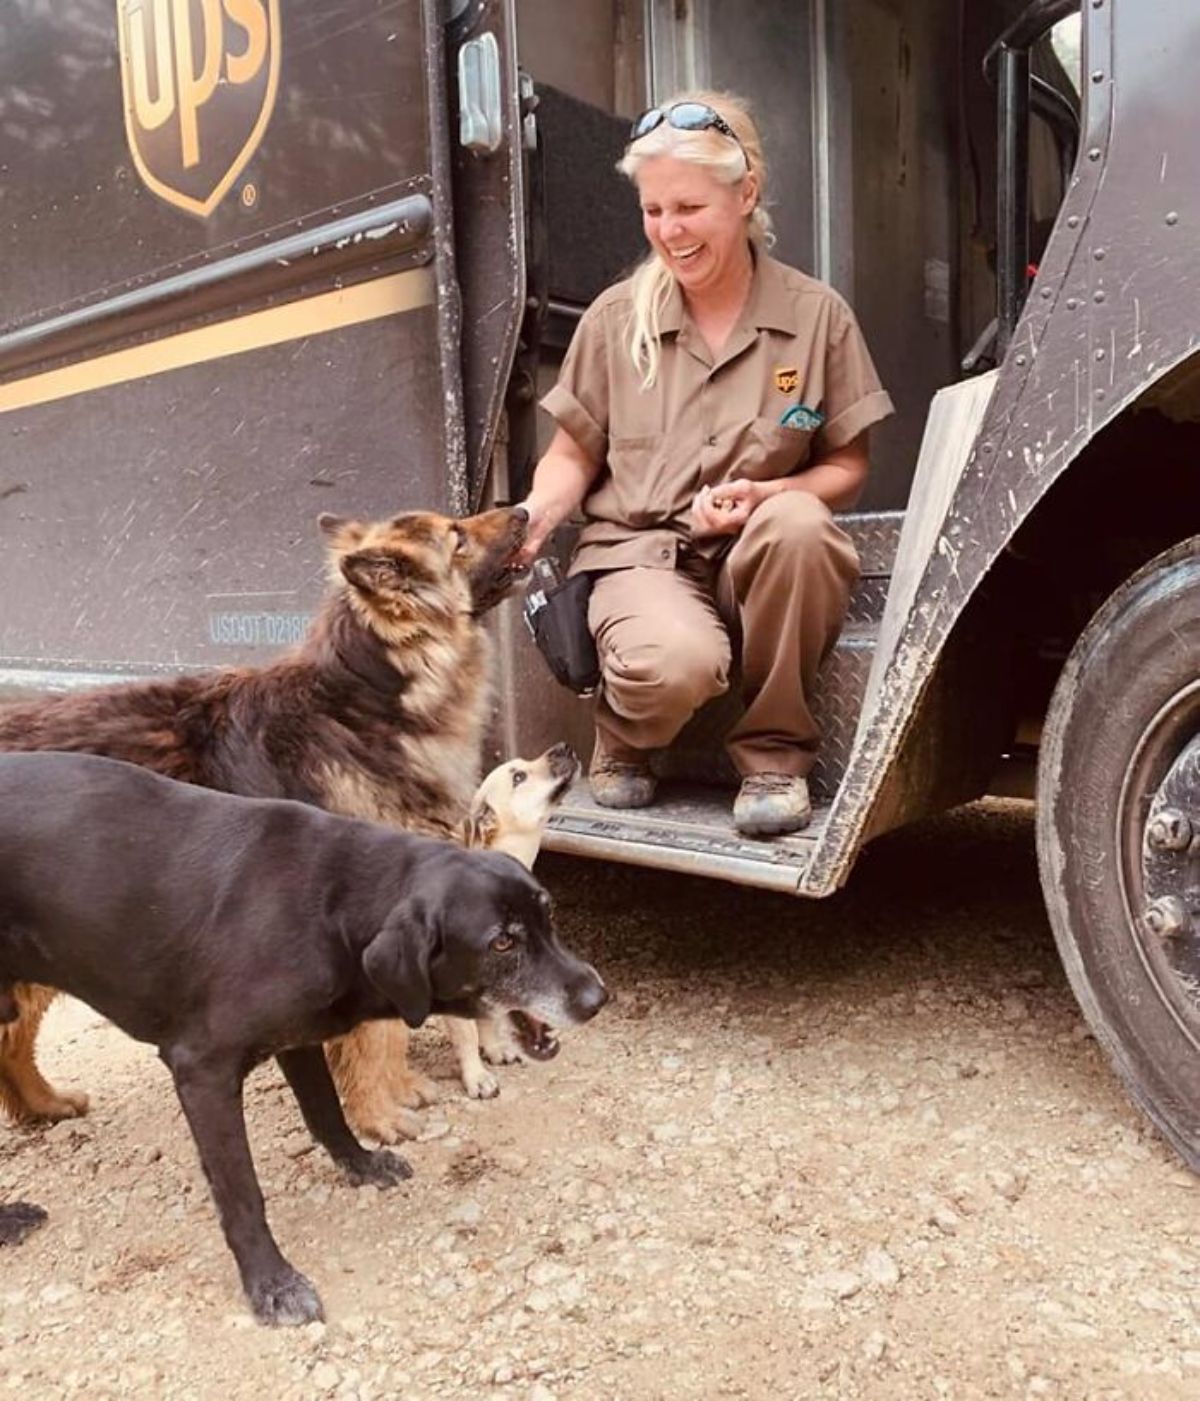 female ups driver giving treats to a brown fluffy dog, a small brown dog and a black dog